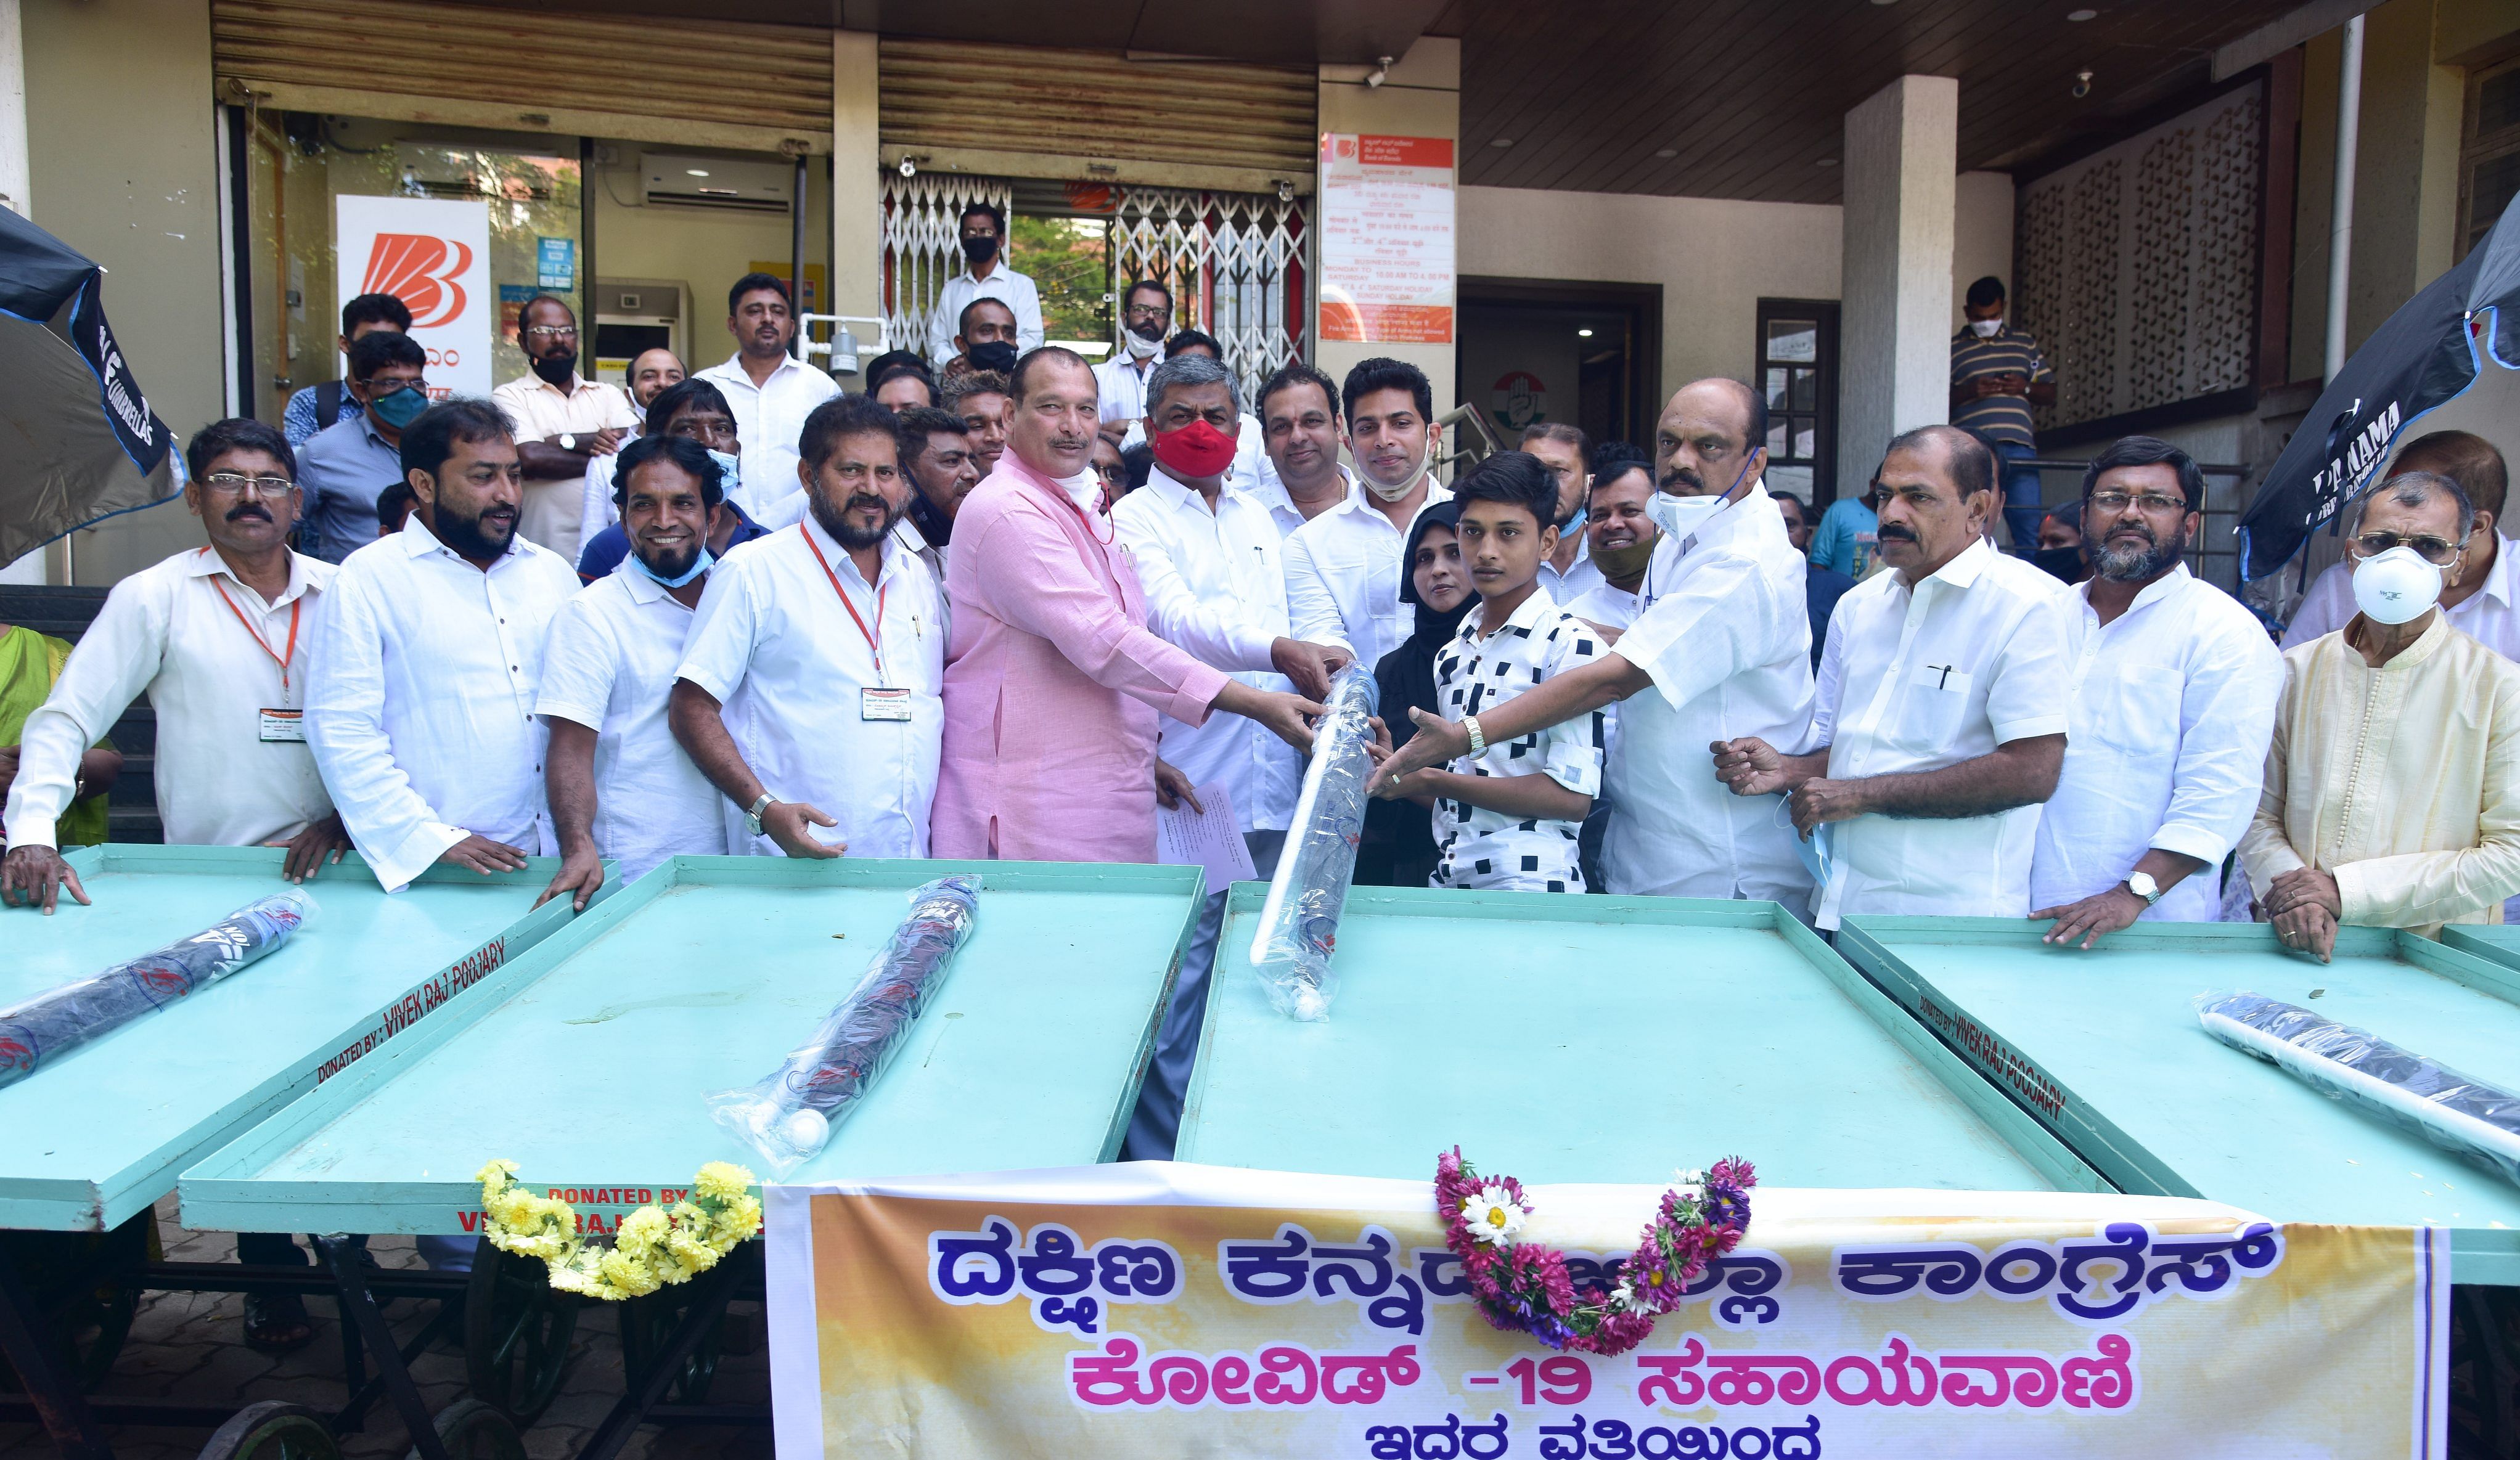 Former MLC Ivan D’Souza, MLC B K Hariprasad and others hand over a pushcart to a beneficiary in Mangaluru. The pushcarts were donated under the aegis of the Congress Covid-19 Helpline. Credit: DH Photo